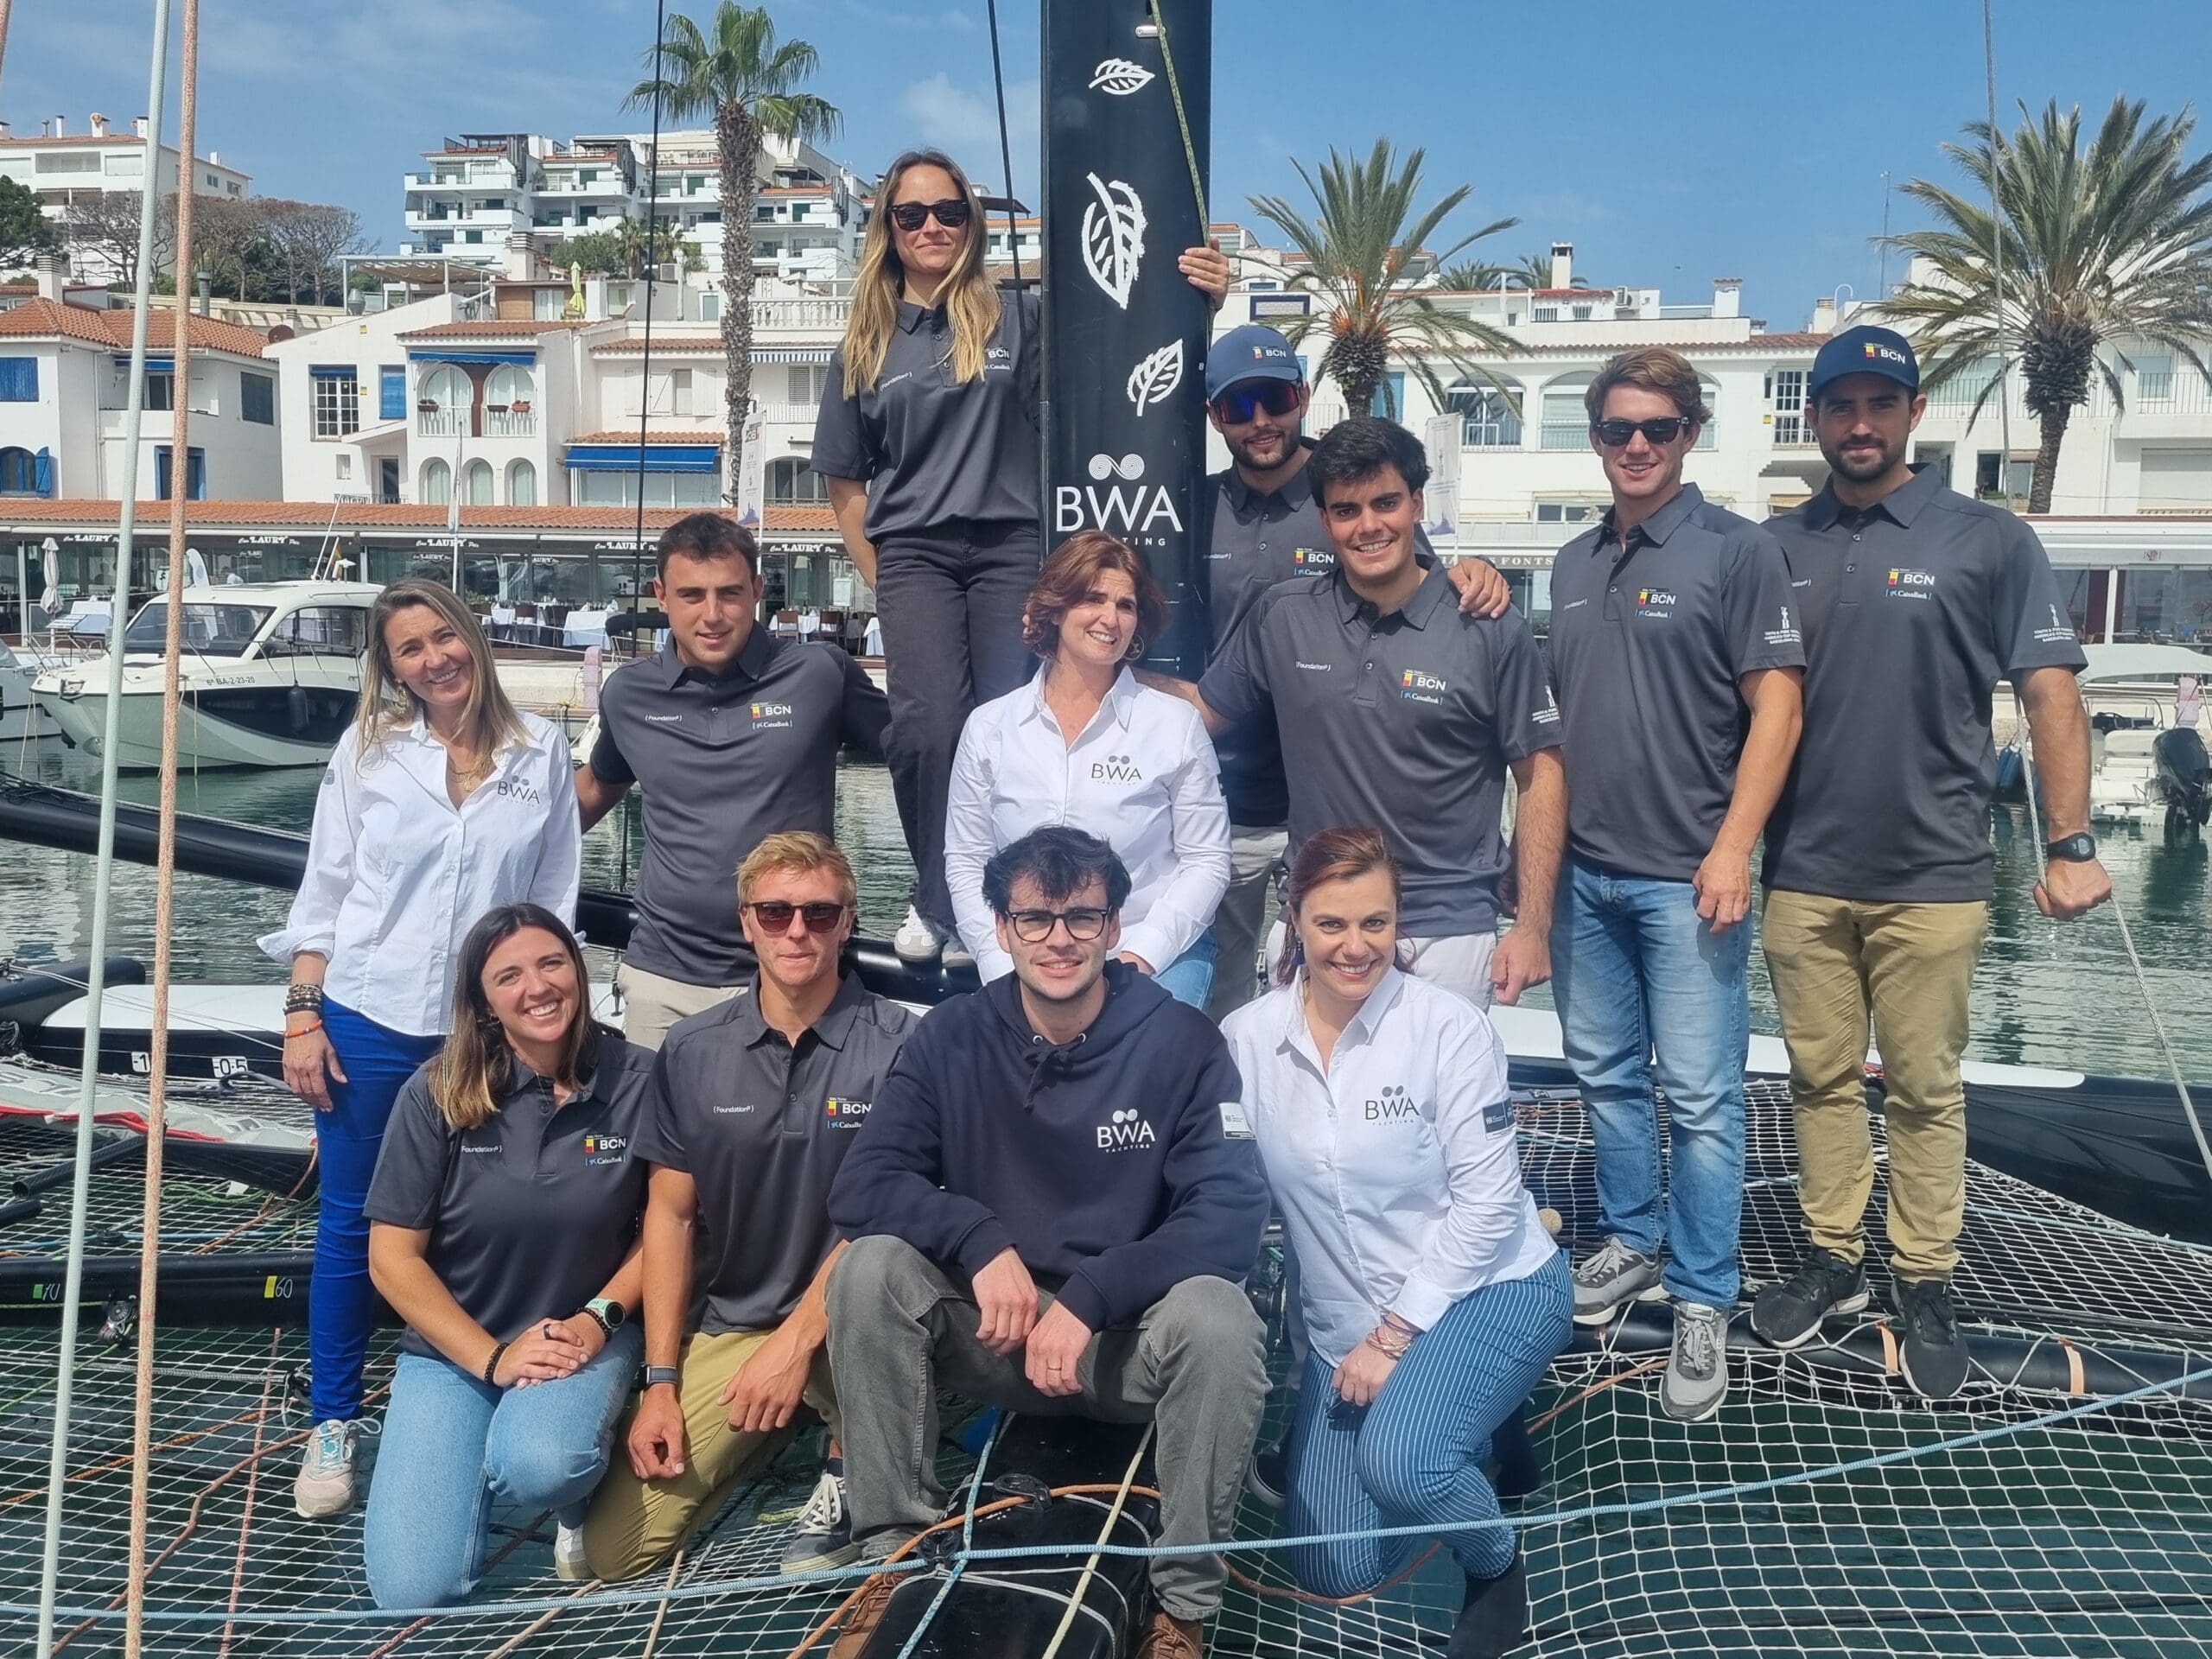 Group photo of 12 men and women taken in the harbour on a superyatch catamaran on the netted area with a BWA Yachting flag in the background.